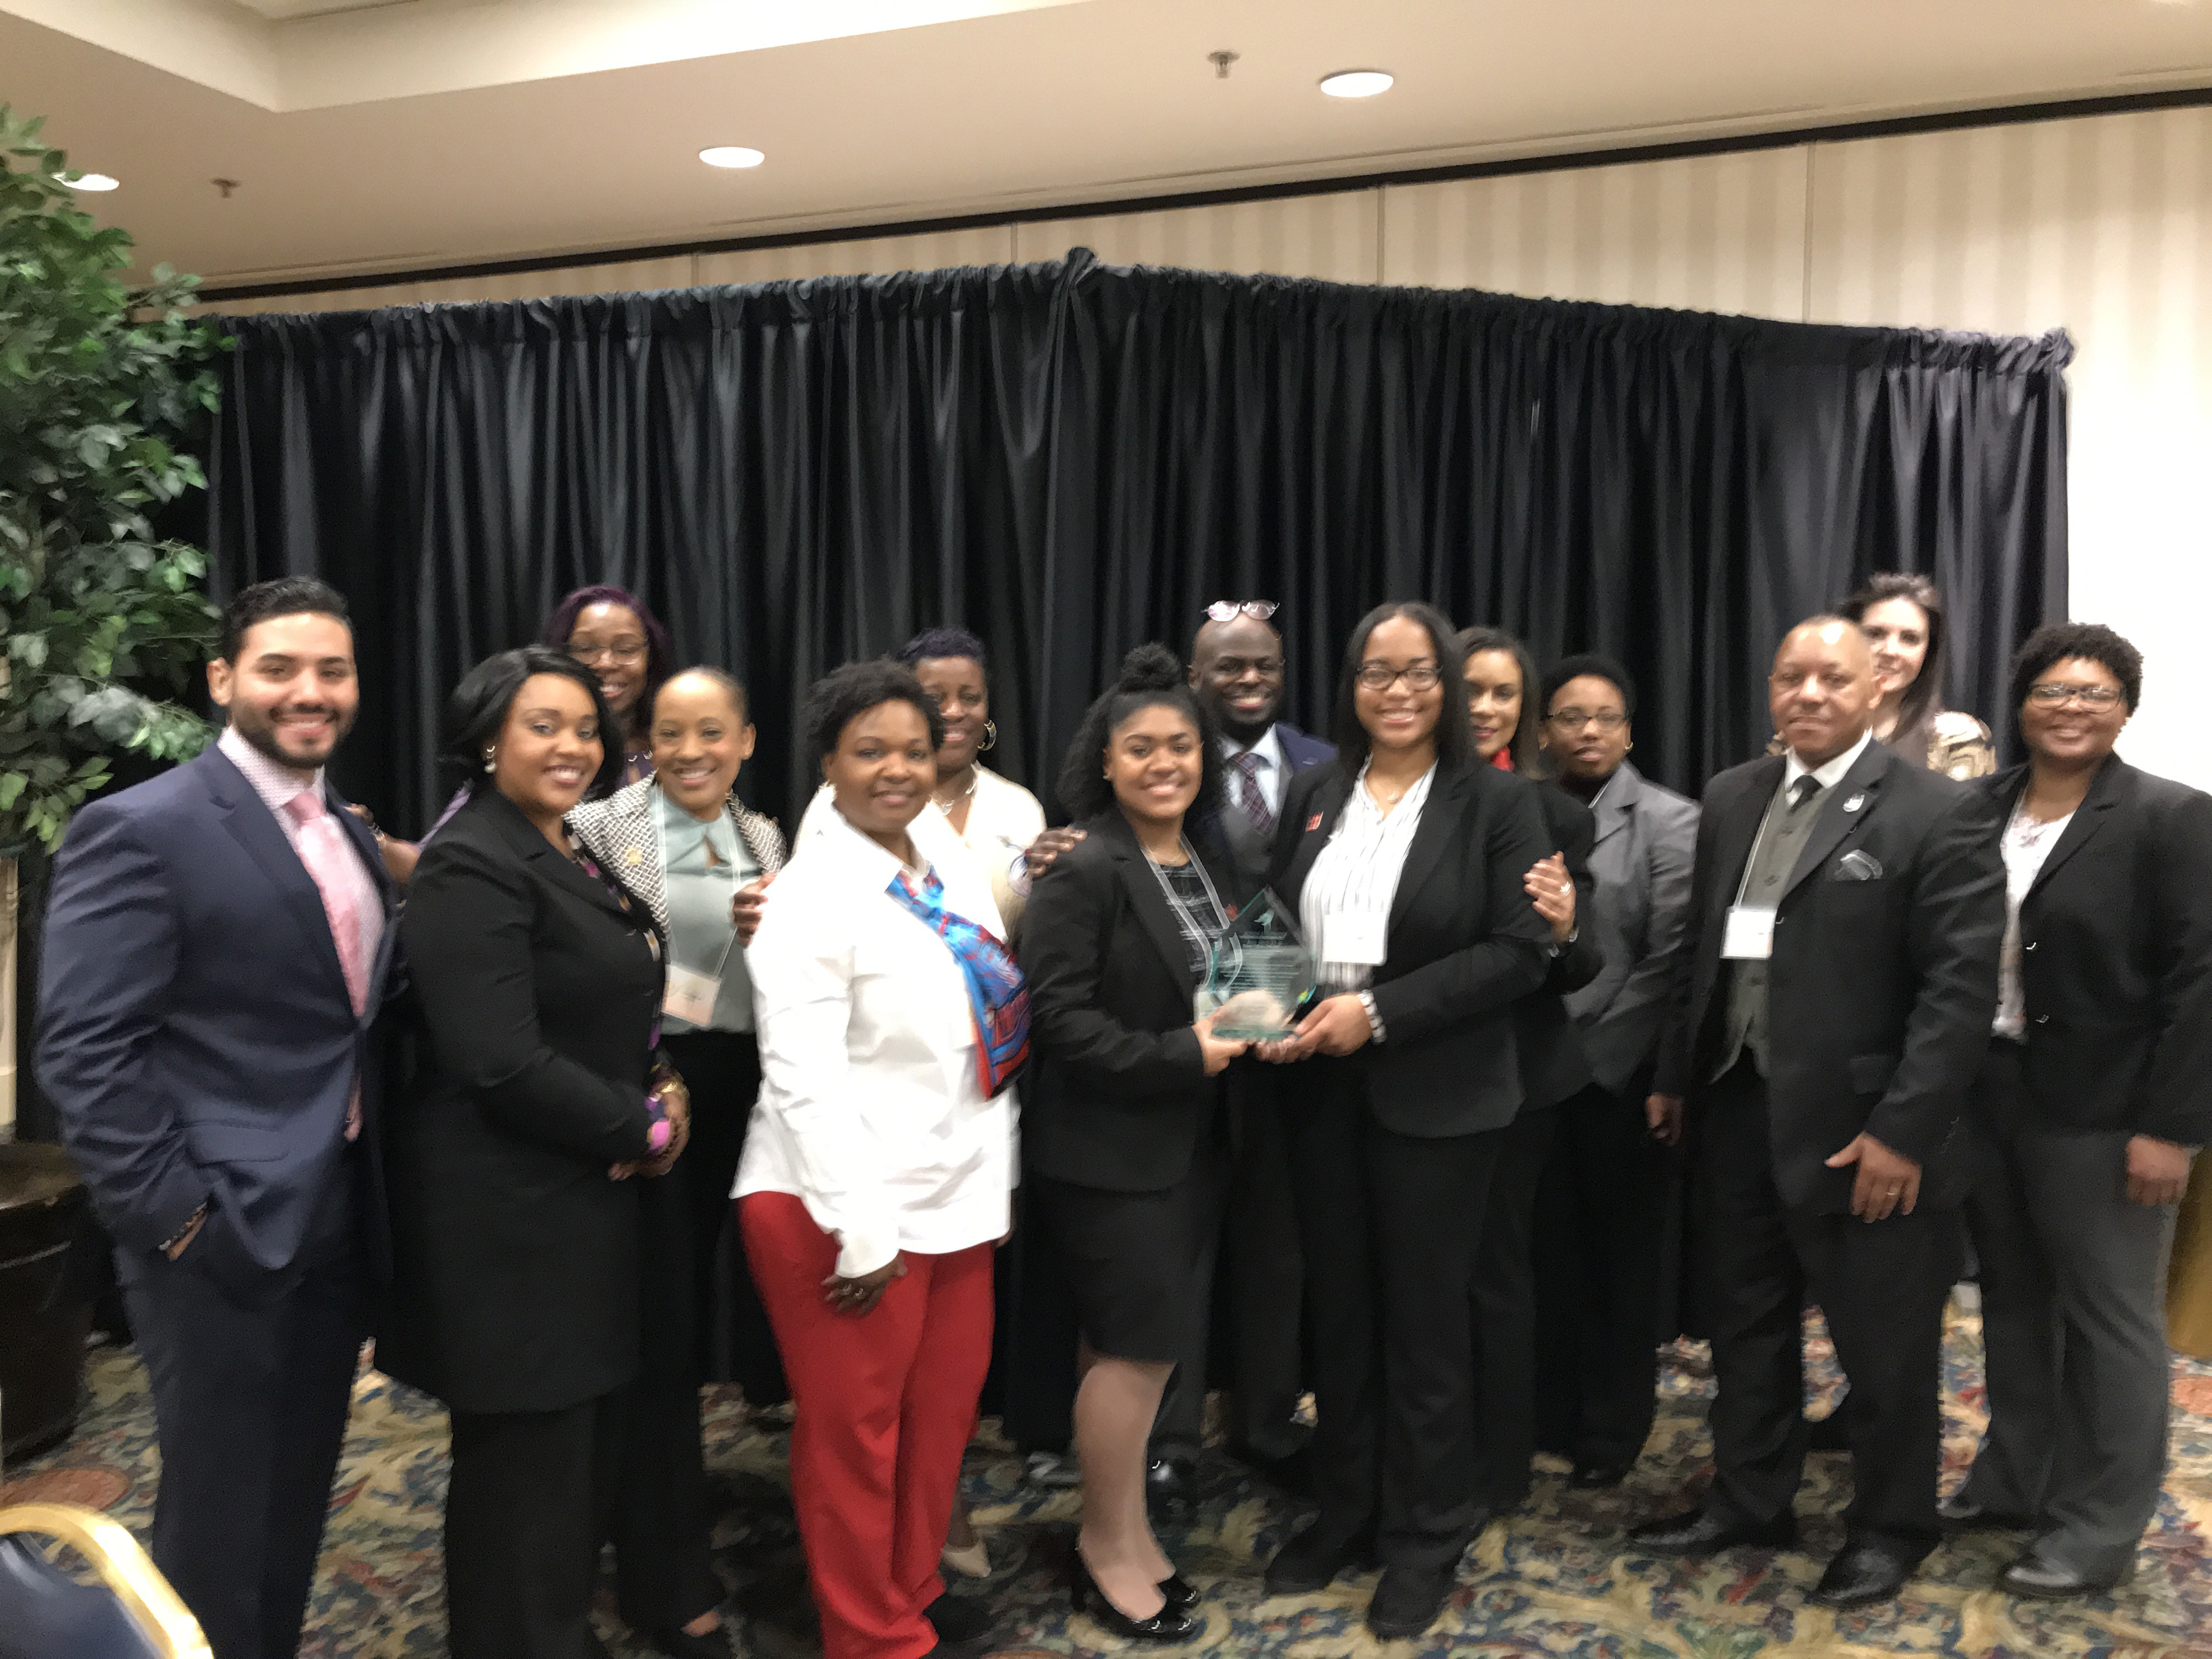 A team of University members represented the institution well at the recent HBCU Retention Summit in Ocean City, Md. , with a number serving as panelists and presenters.